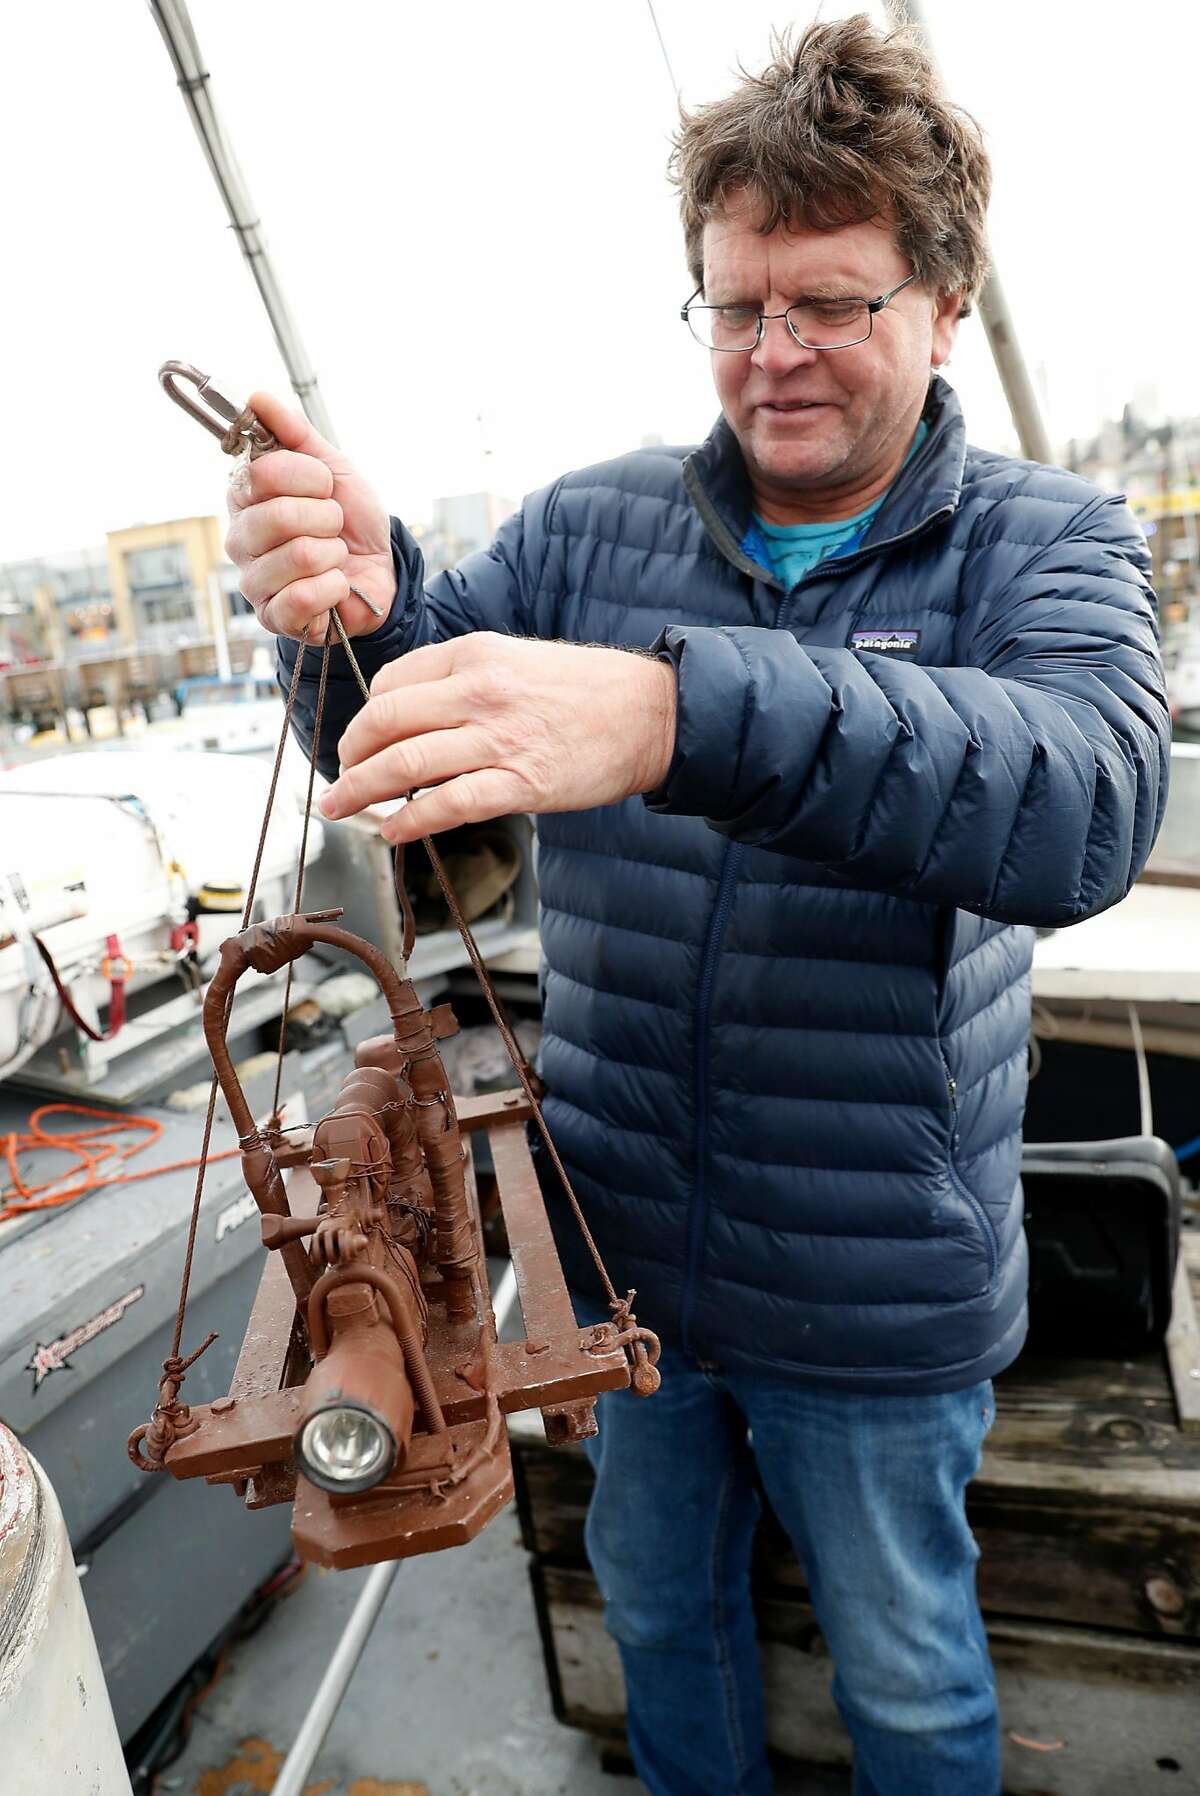 John Miller holds "The Sledge." his underwater rig that he uses a GoPro on to study herring. Photographed on Miller's boat, High Hopes, at Pier 45 in San Francisco, Calif. on Monday, January 14, 2019.